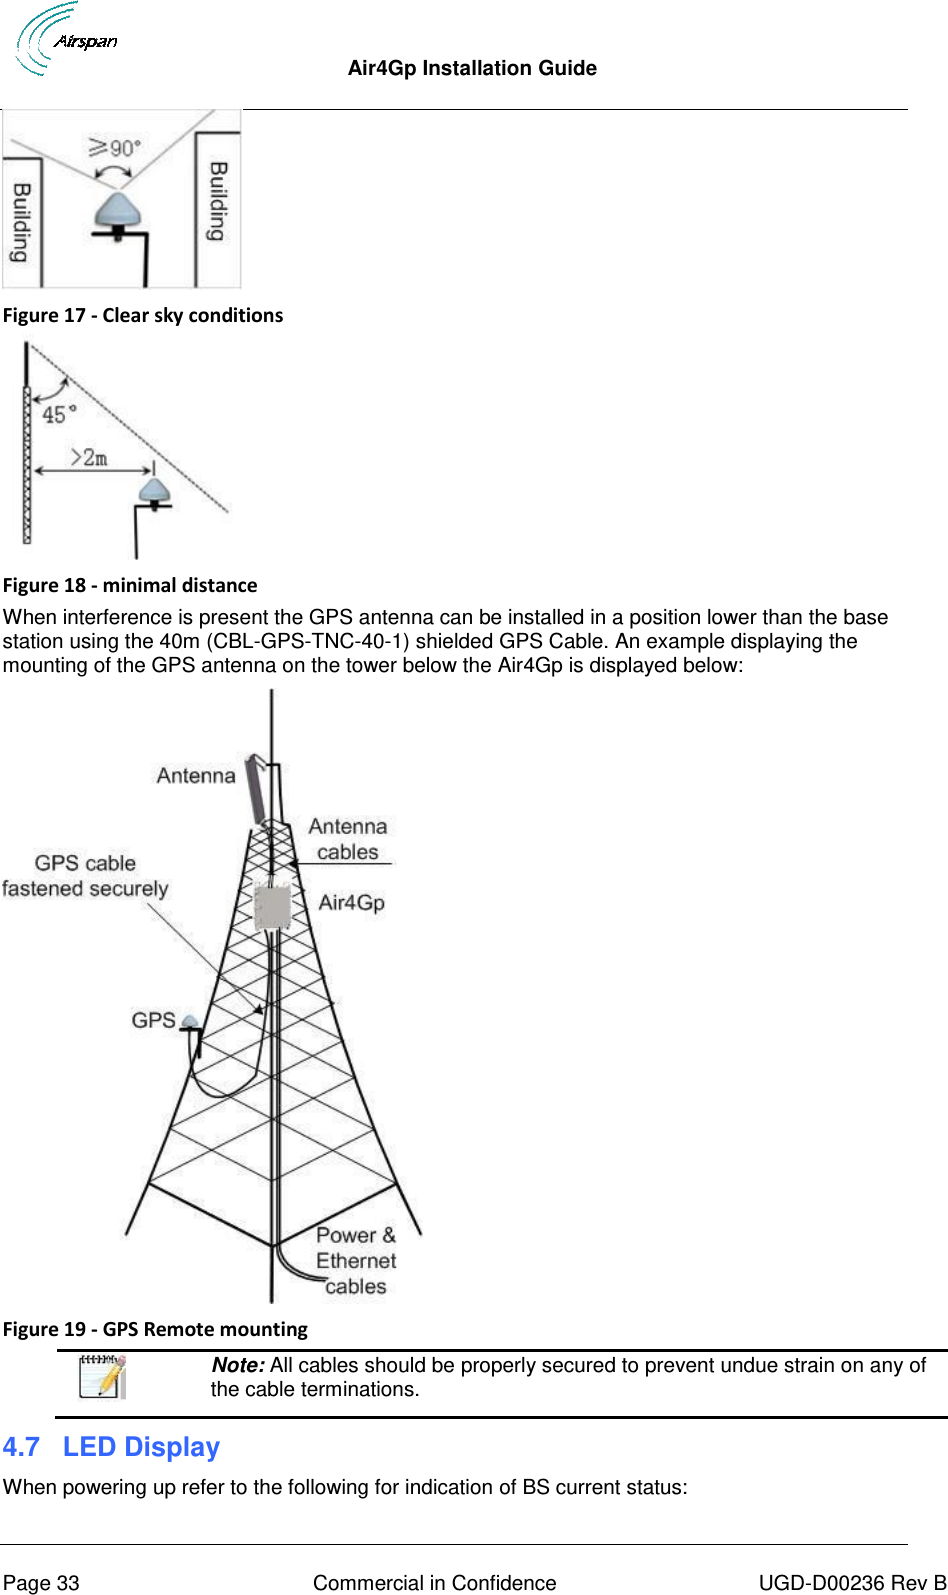  Air4Gp Installation Guide     Page 33  Commercial in Confidence  UGD-D00236 Rev B  Figure 17 - Clear sky conditions  Figure 18 - minimal distance When interference is present the GPS antenna can be installed in a position lower than the base station using the 40m (CBL-GPS-TNC-40-1) shielded GPS Cable. An example displaying the mounting of the GPS antenna on the tower below the Air4Gp is displayed below:  Figure 19 - GPS Remote mounting  Note: All cables should be properly secured to prevent undue strain on any of the cable terminations. 4.7  LED Display When powering up refer to the following for indication of BS current status: 